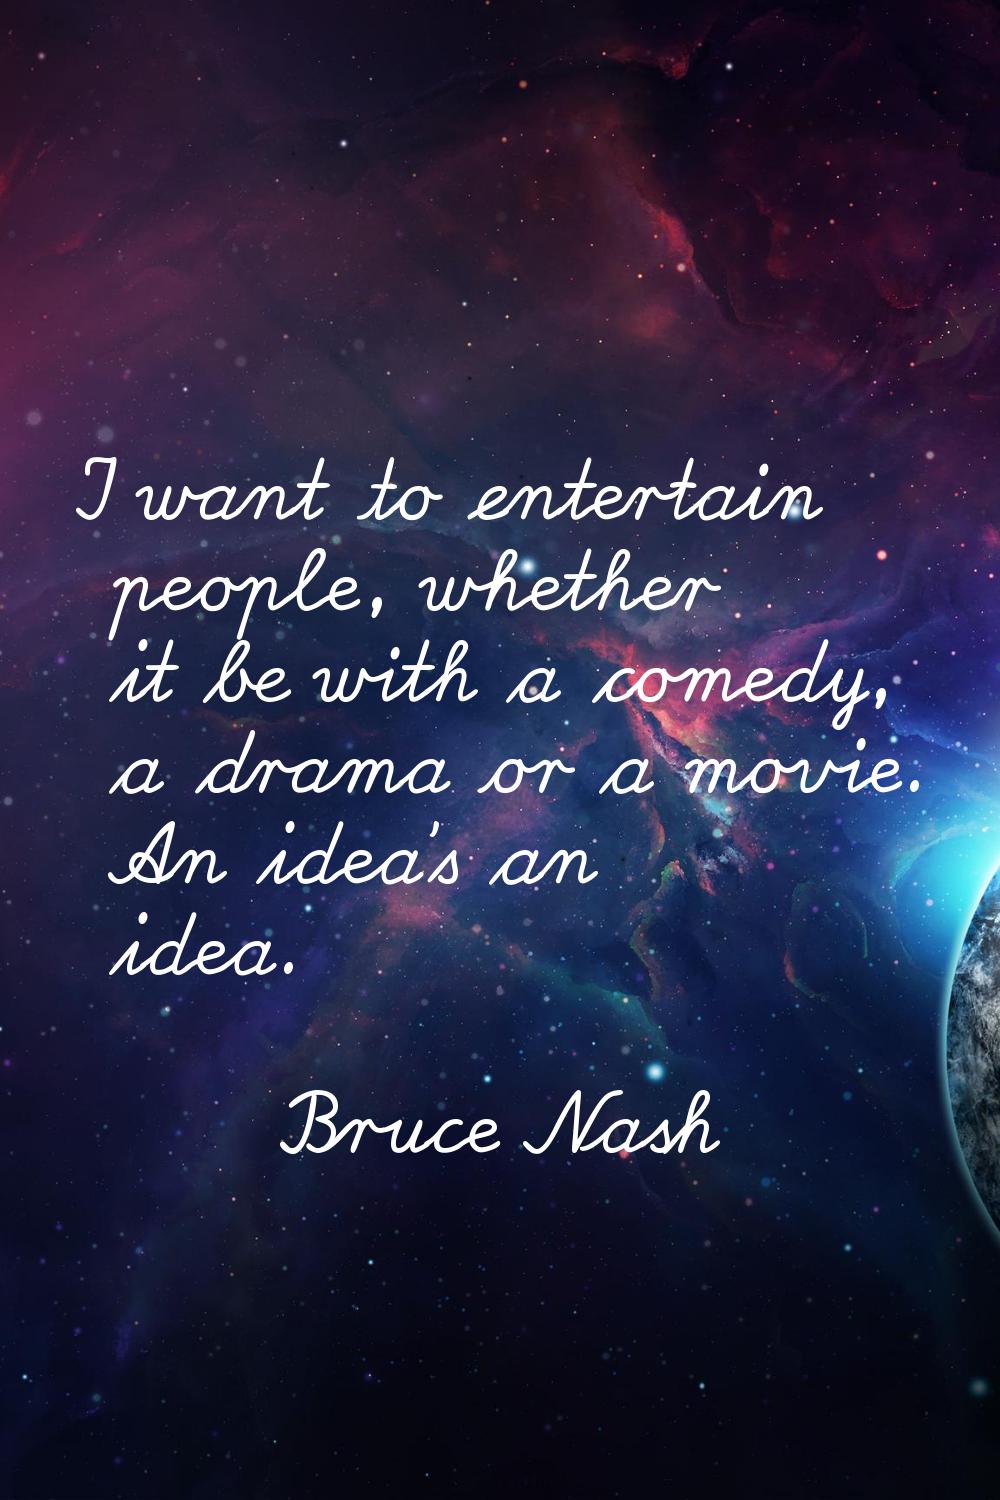 I want to entertain people, whether it be with a comedy, a drama or a movie. An idea's an idea.